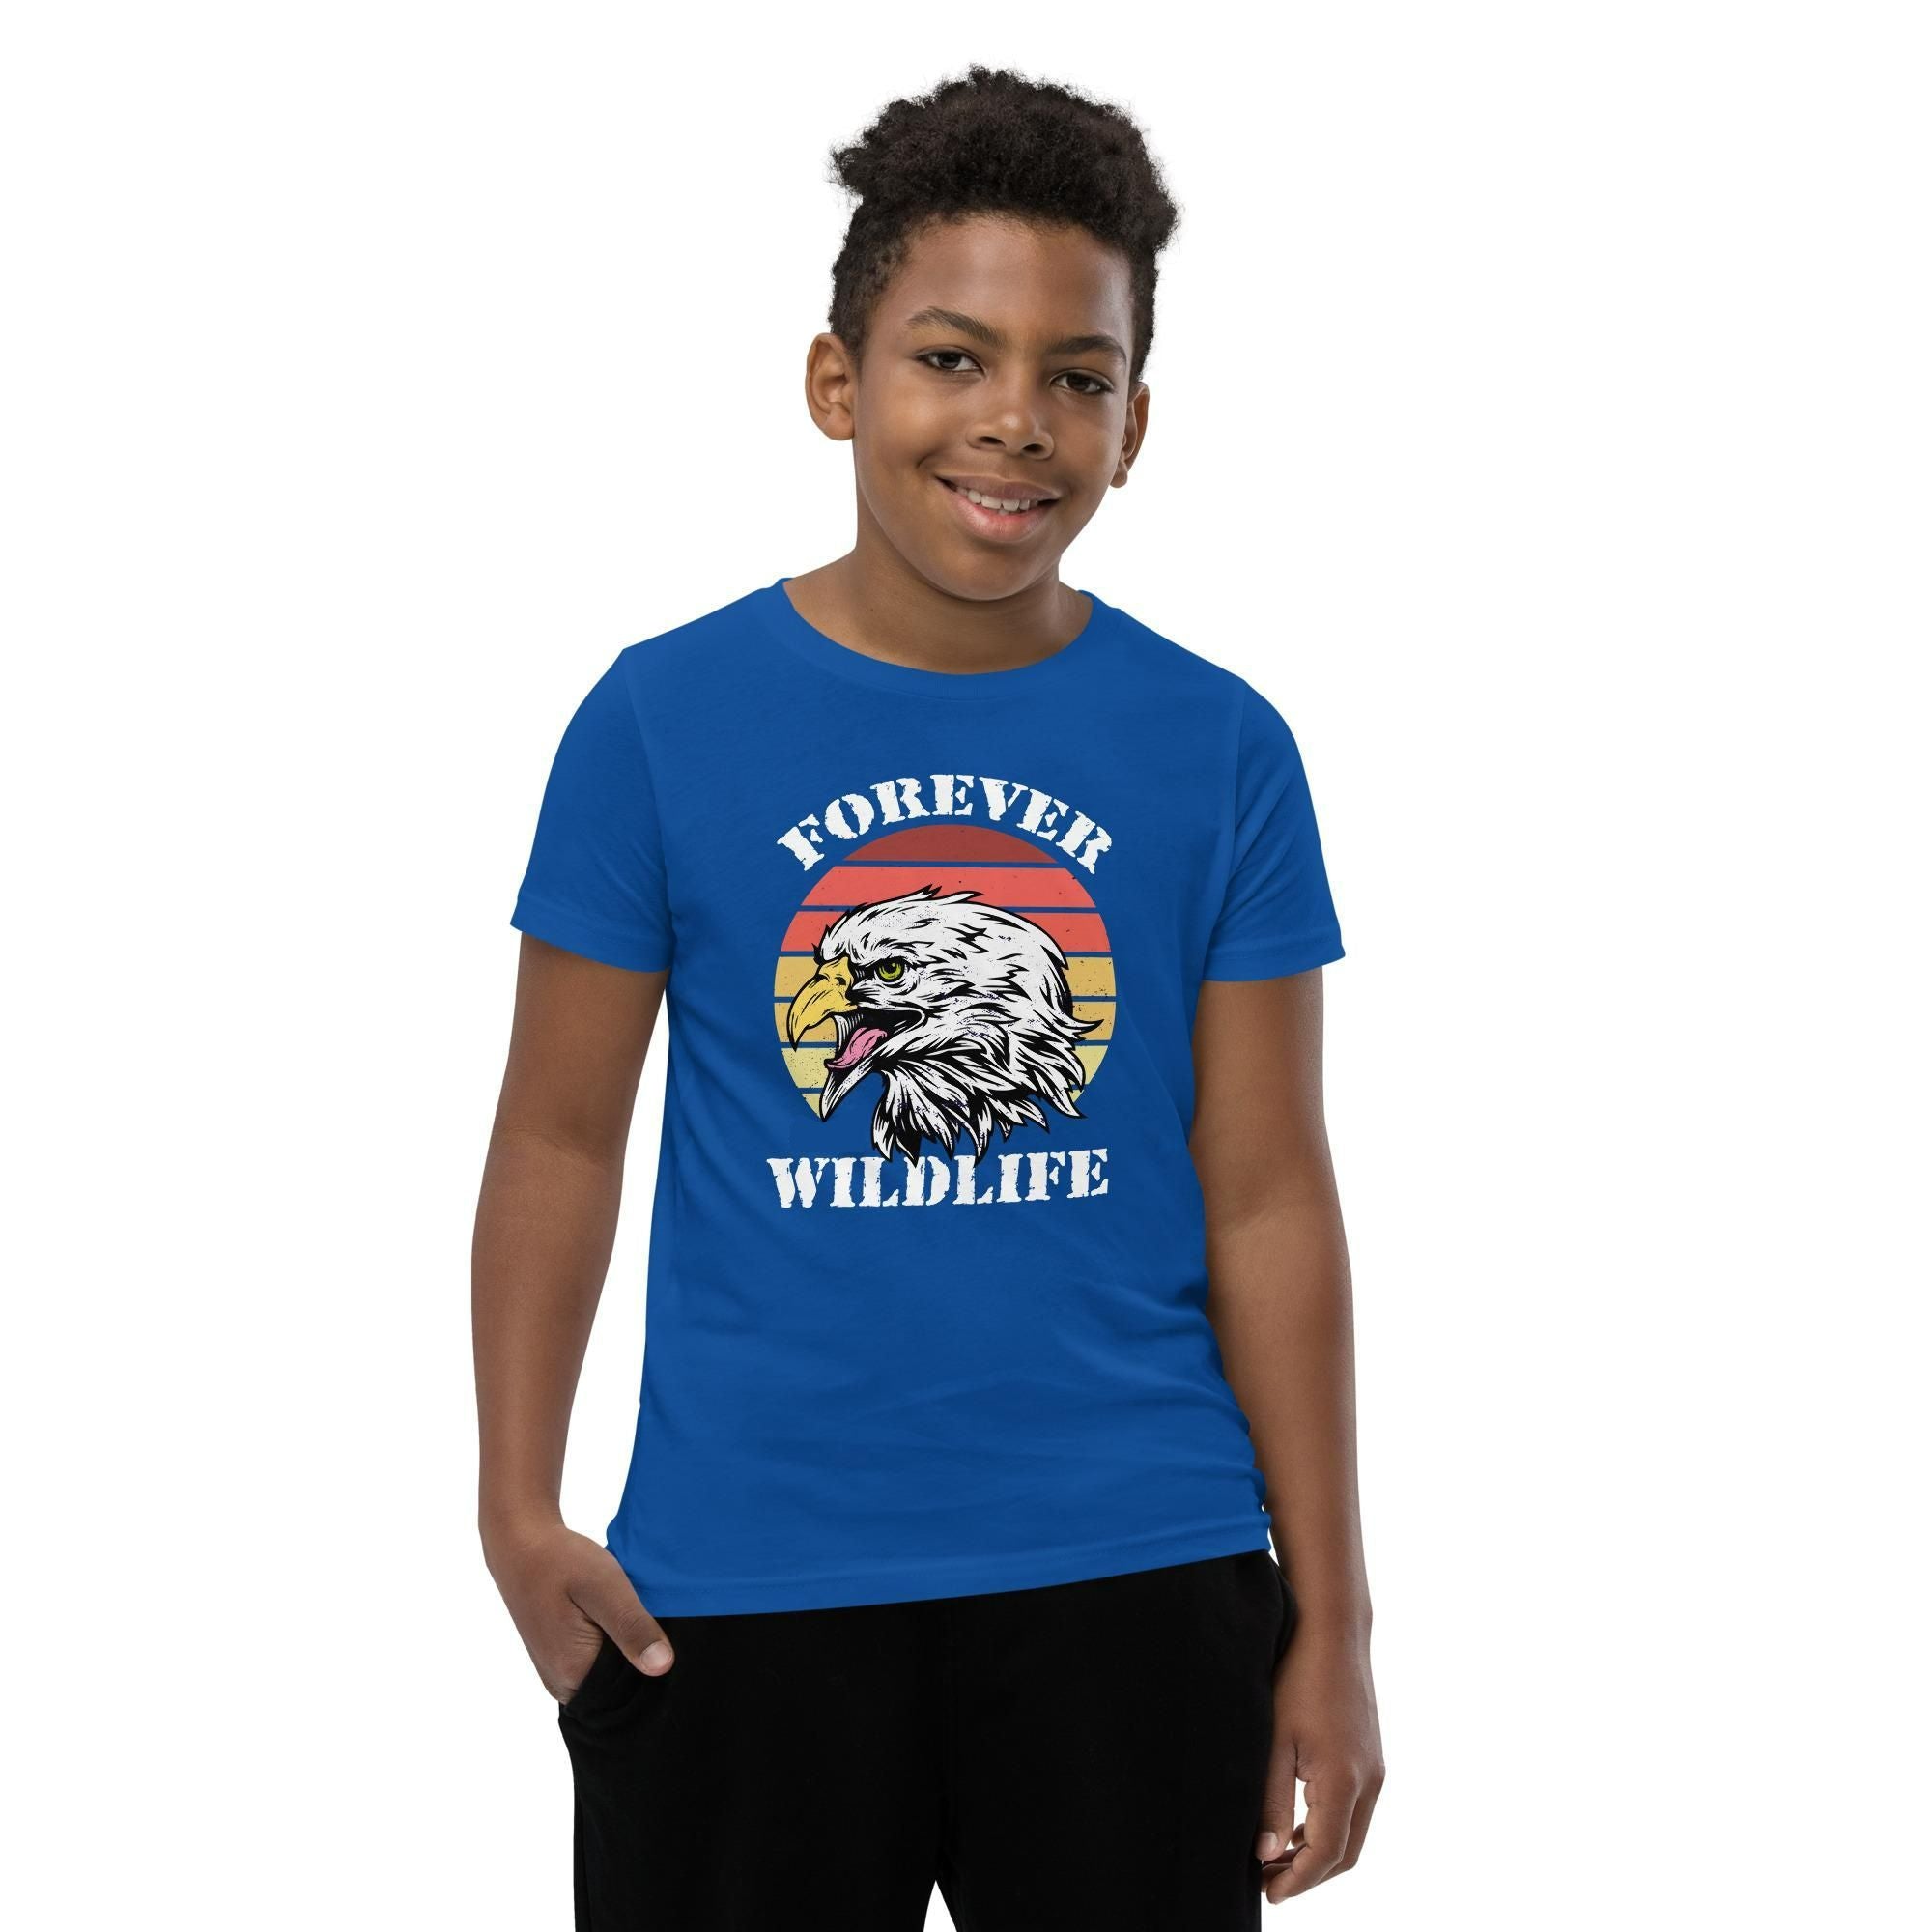 Teen wearing Blue Youth T-Shirt with Eagle graphic as part of Wildlife T Shirts, Wildlife Clothing & Apparel by Forever Wildlife